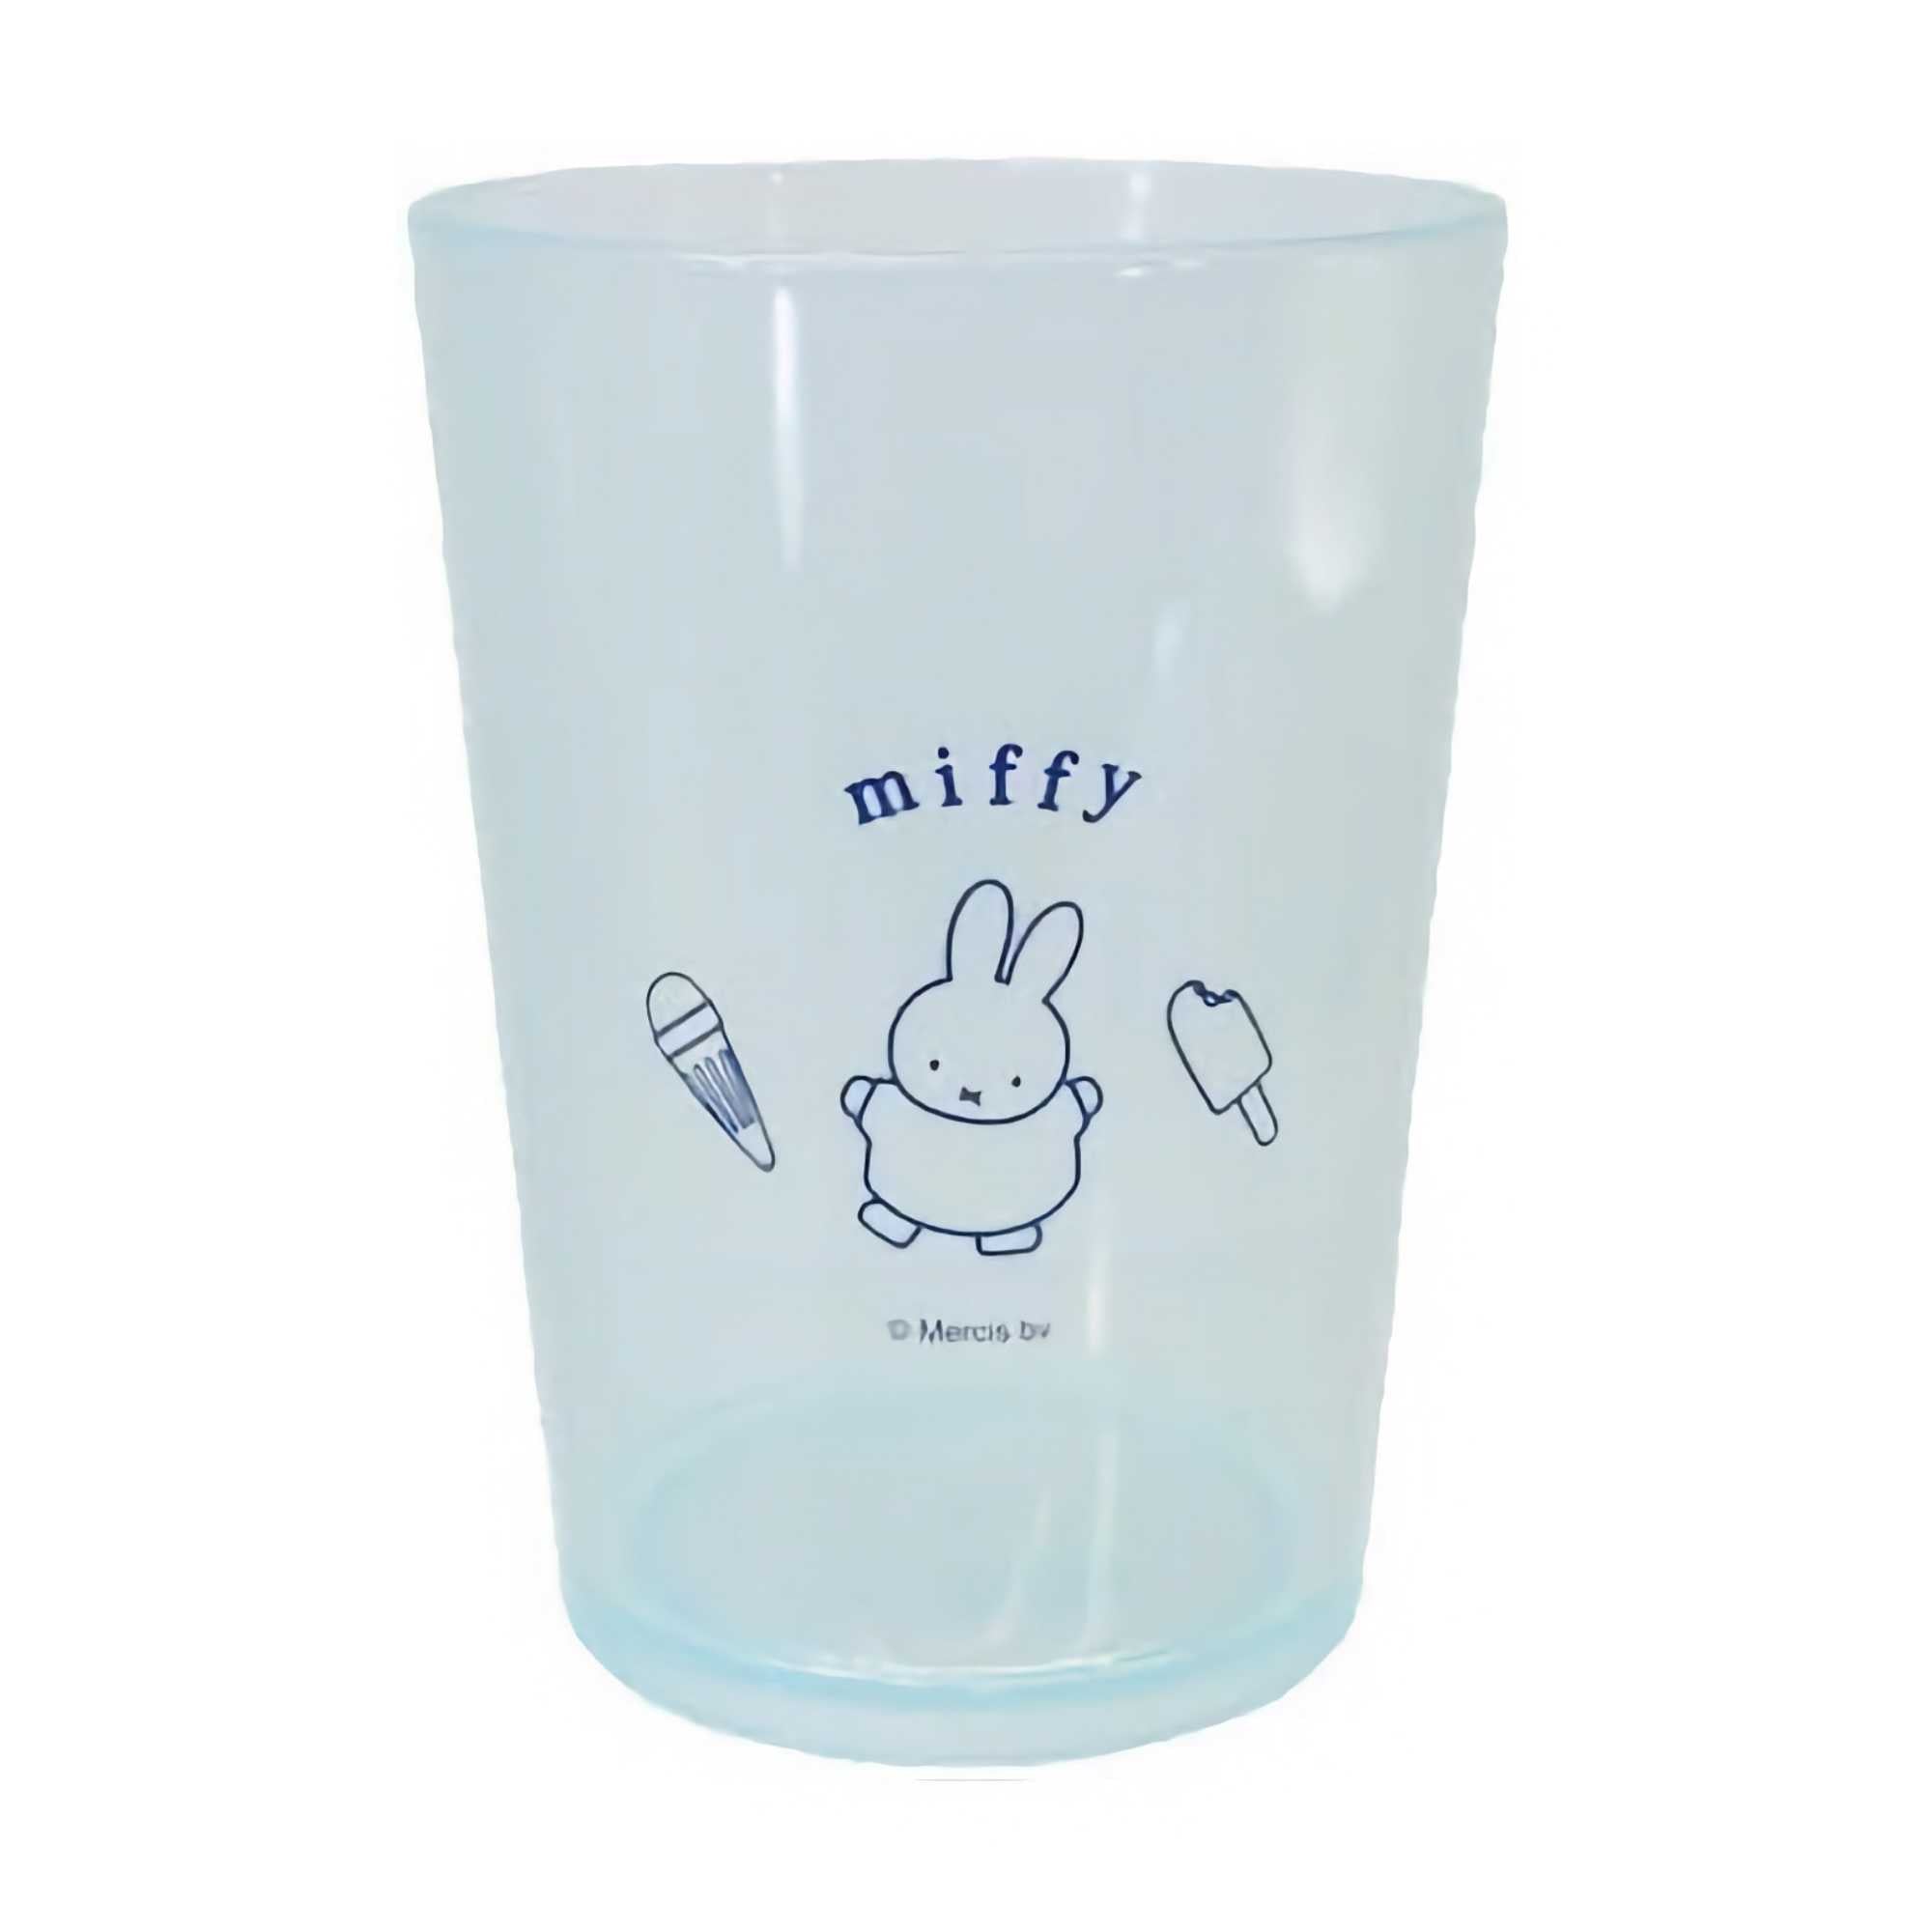 Marimo Craft Bruna's Miffy Clear Cup, miffy with ice cream